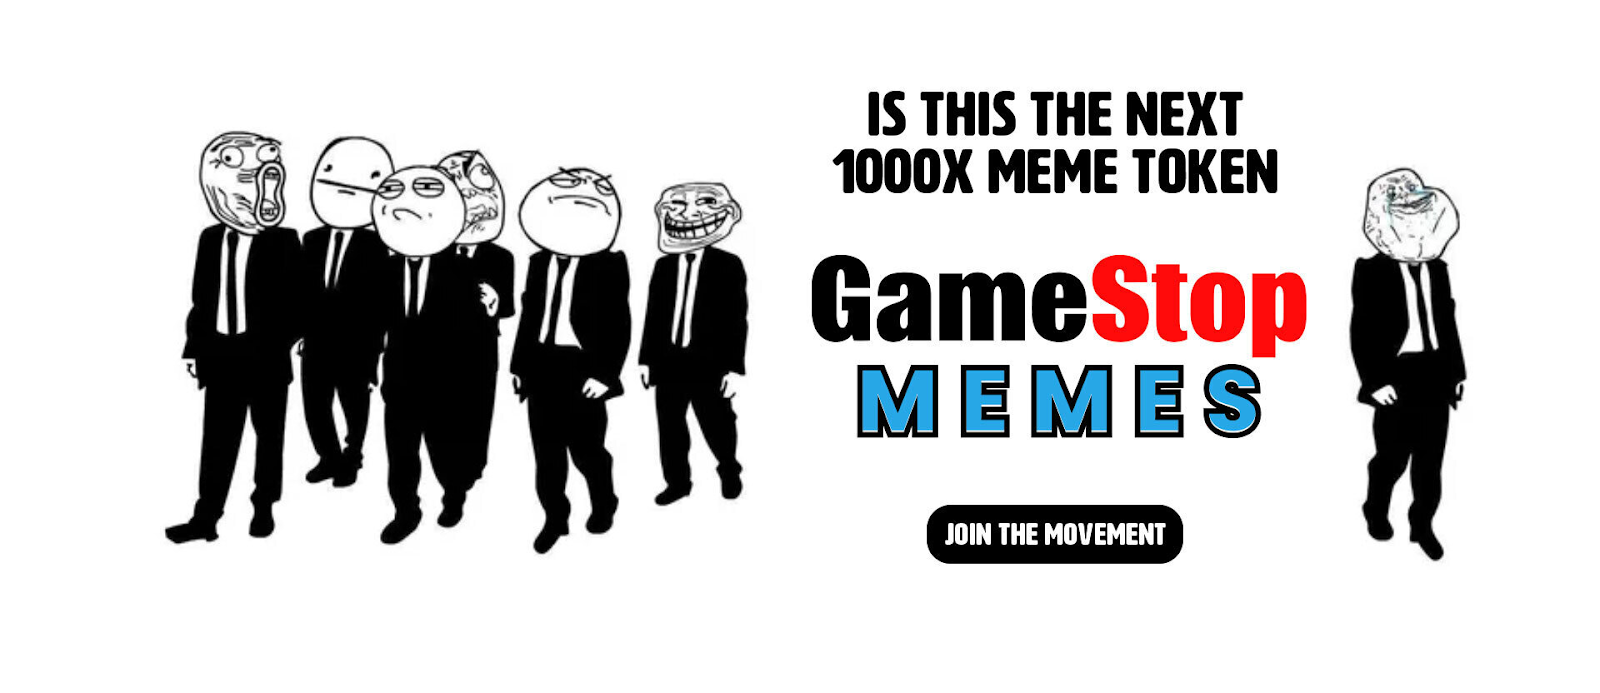 Can GameStop Memes 500x Potential Beat Solana and Avalanche? 